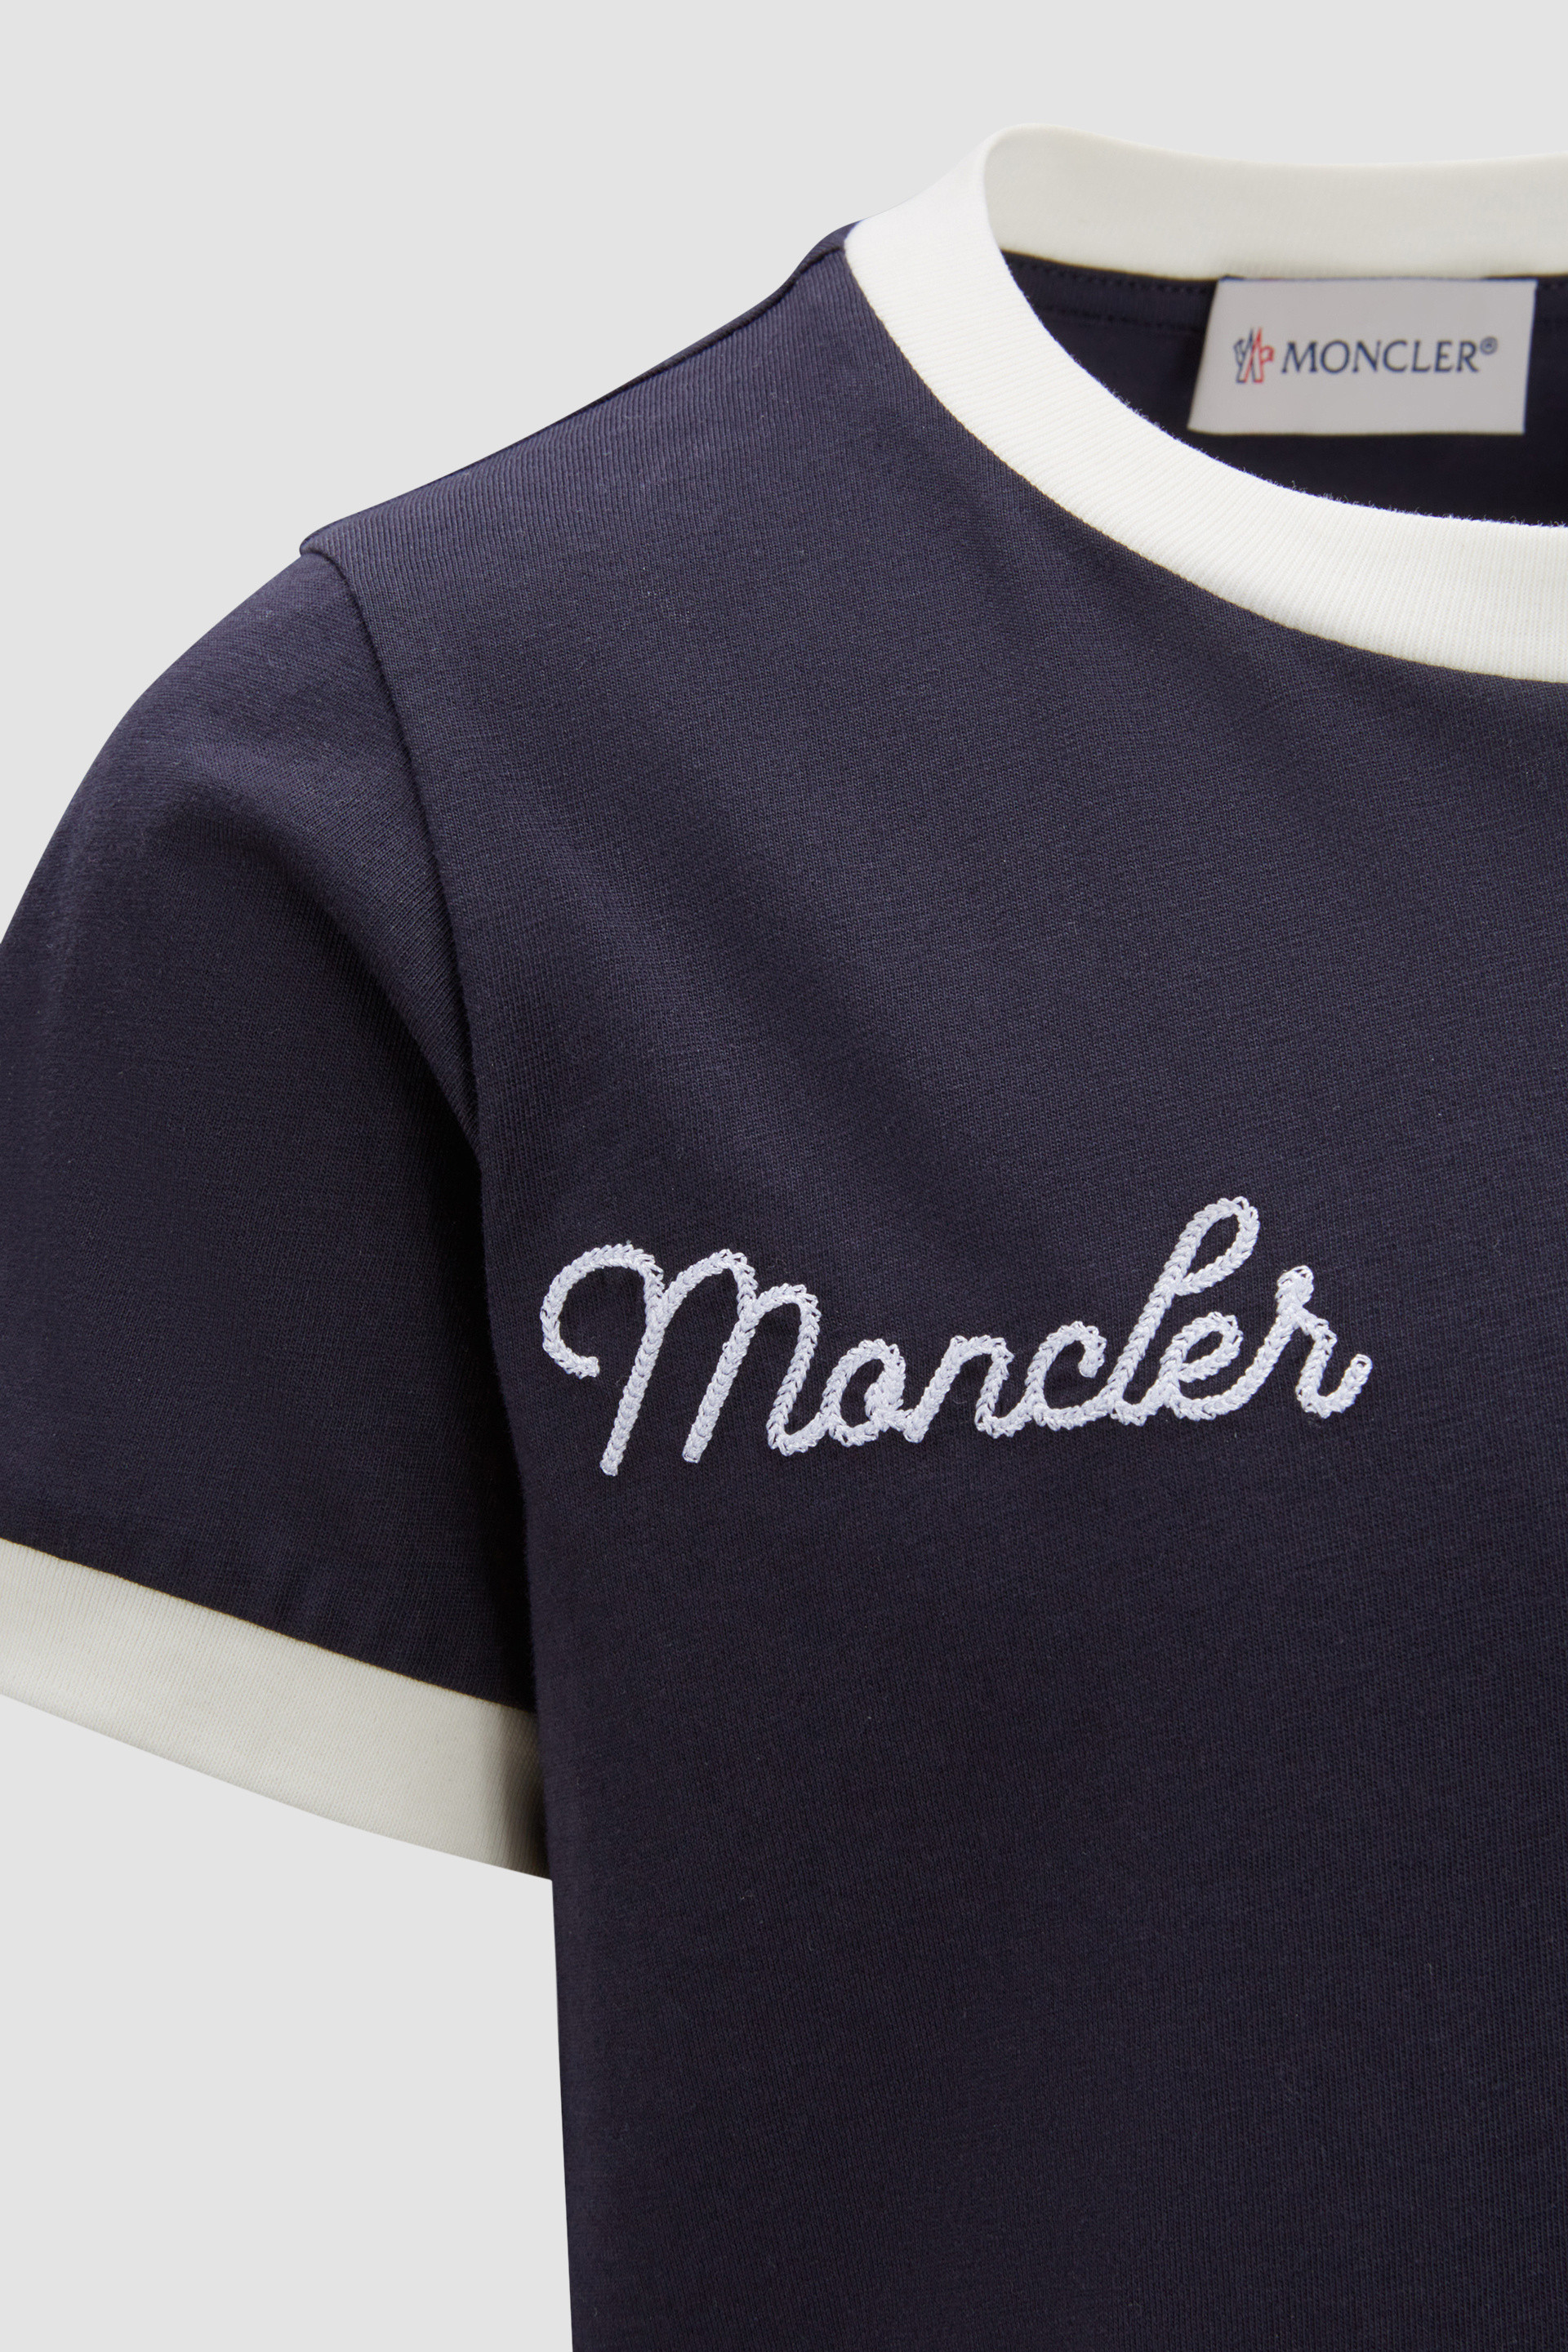 Moncler T-shirt - Black » New Products Every Day » Kids Fashion